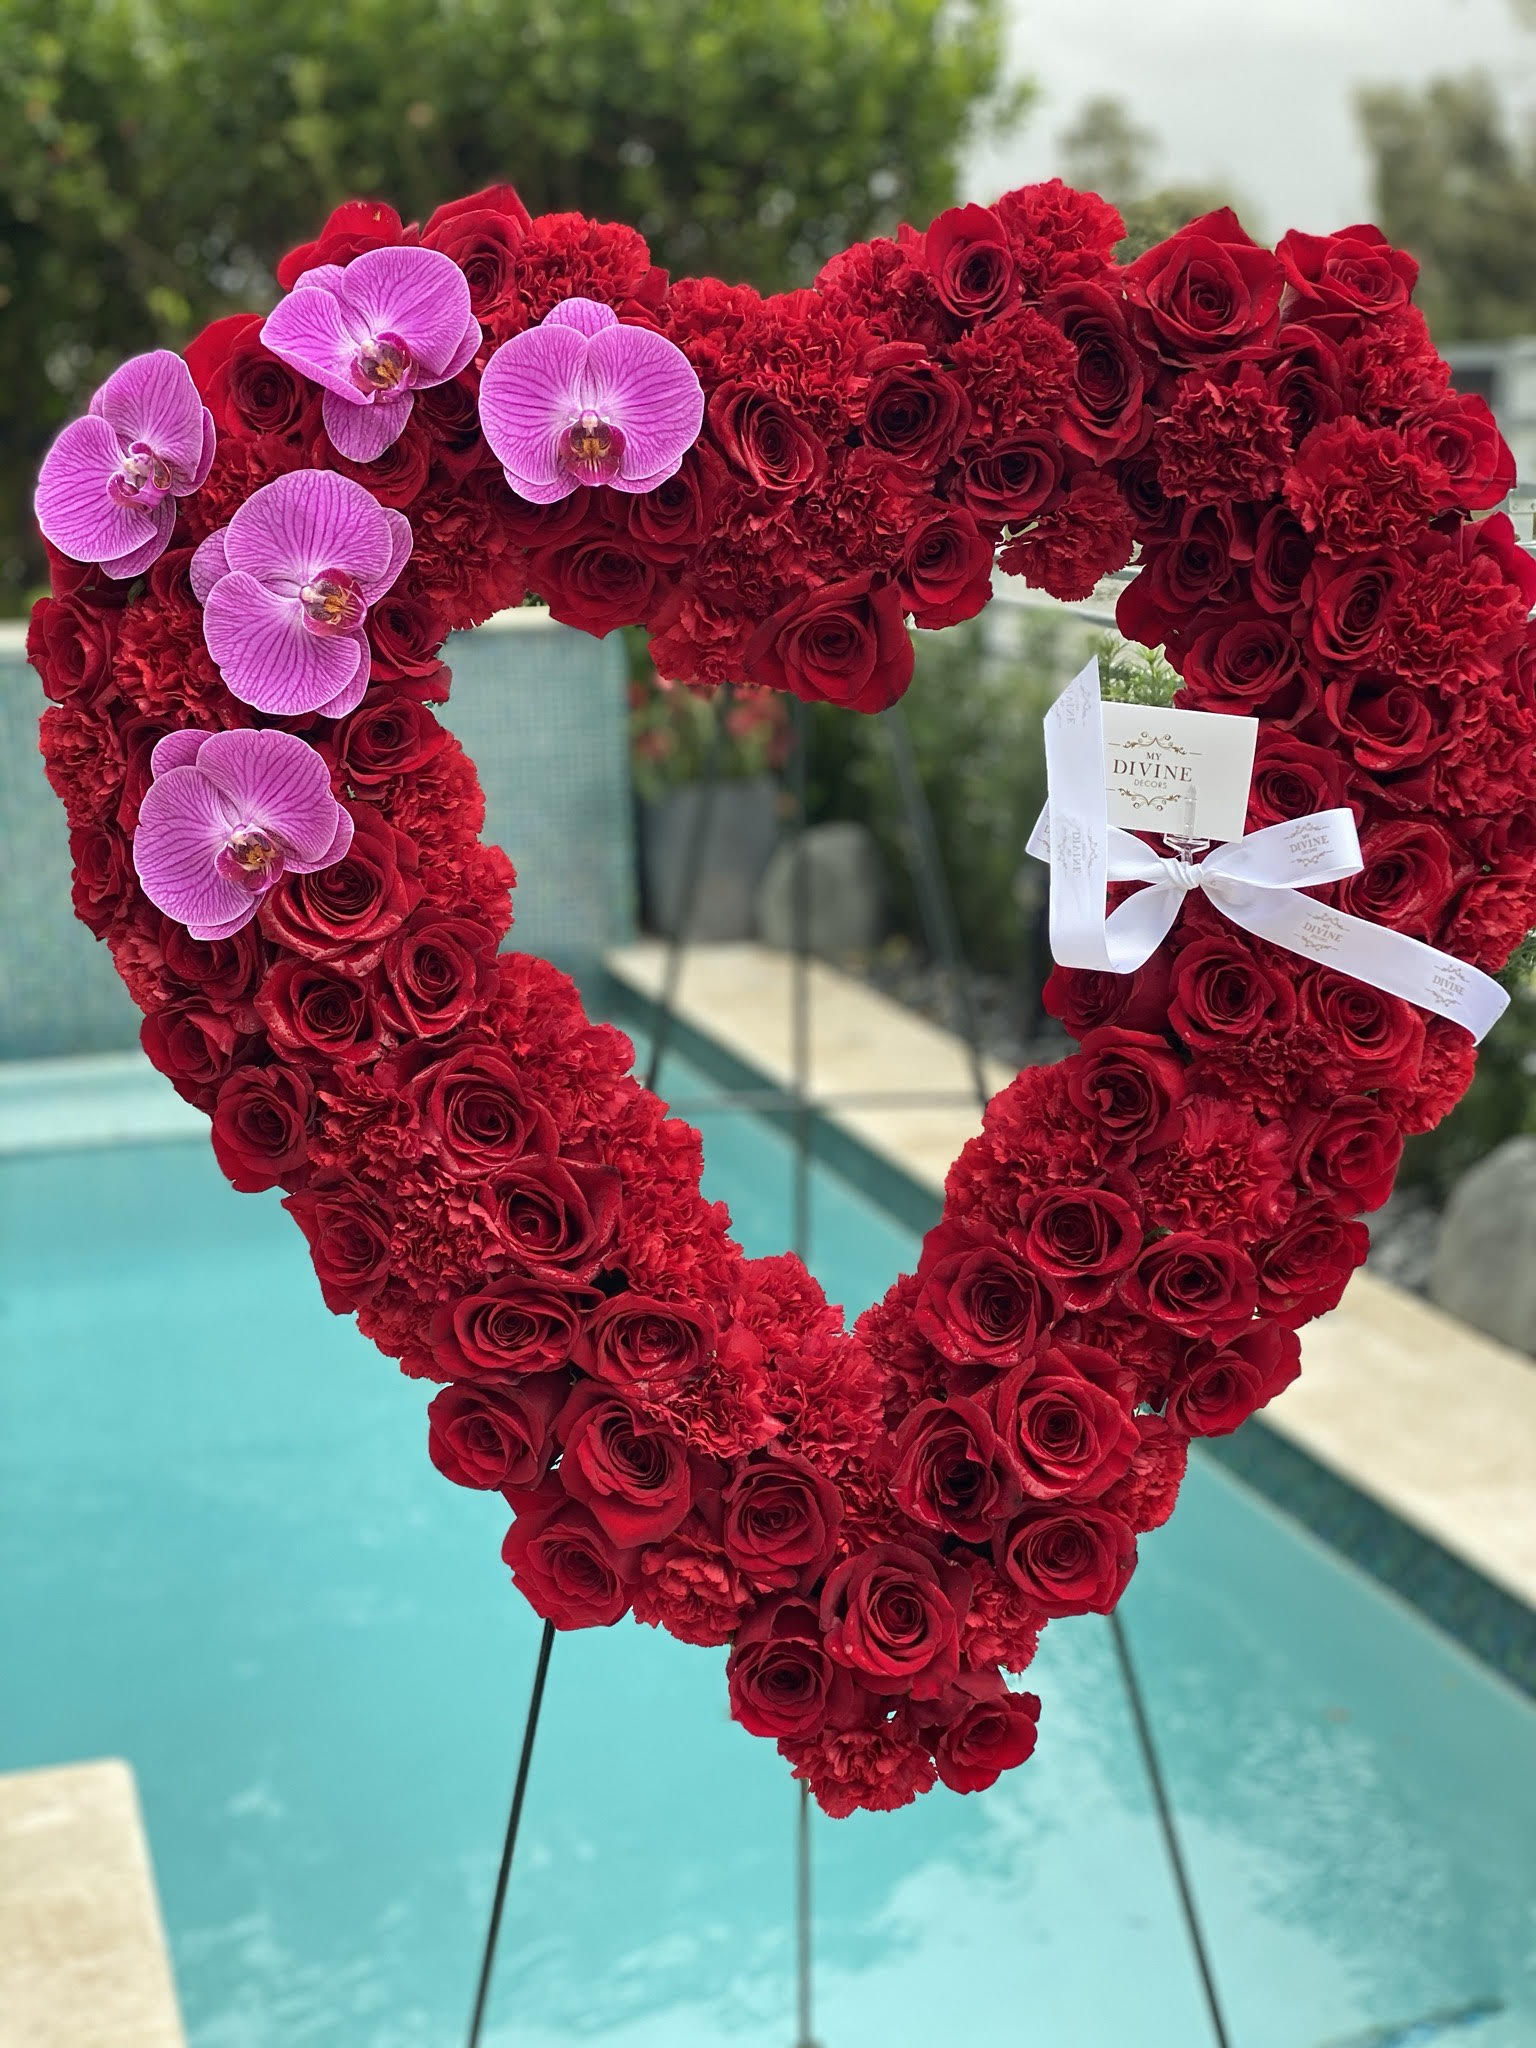 Large Red Heart Wreath With Orchids - My Divine Decors Flower Boutique ...